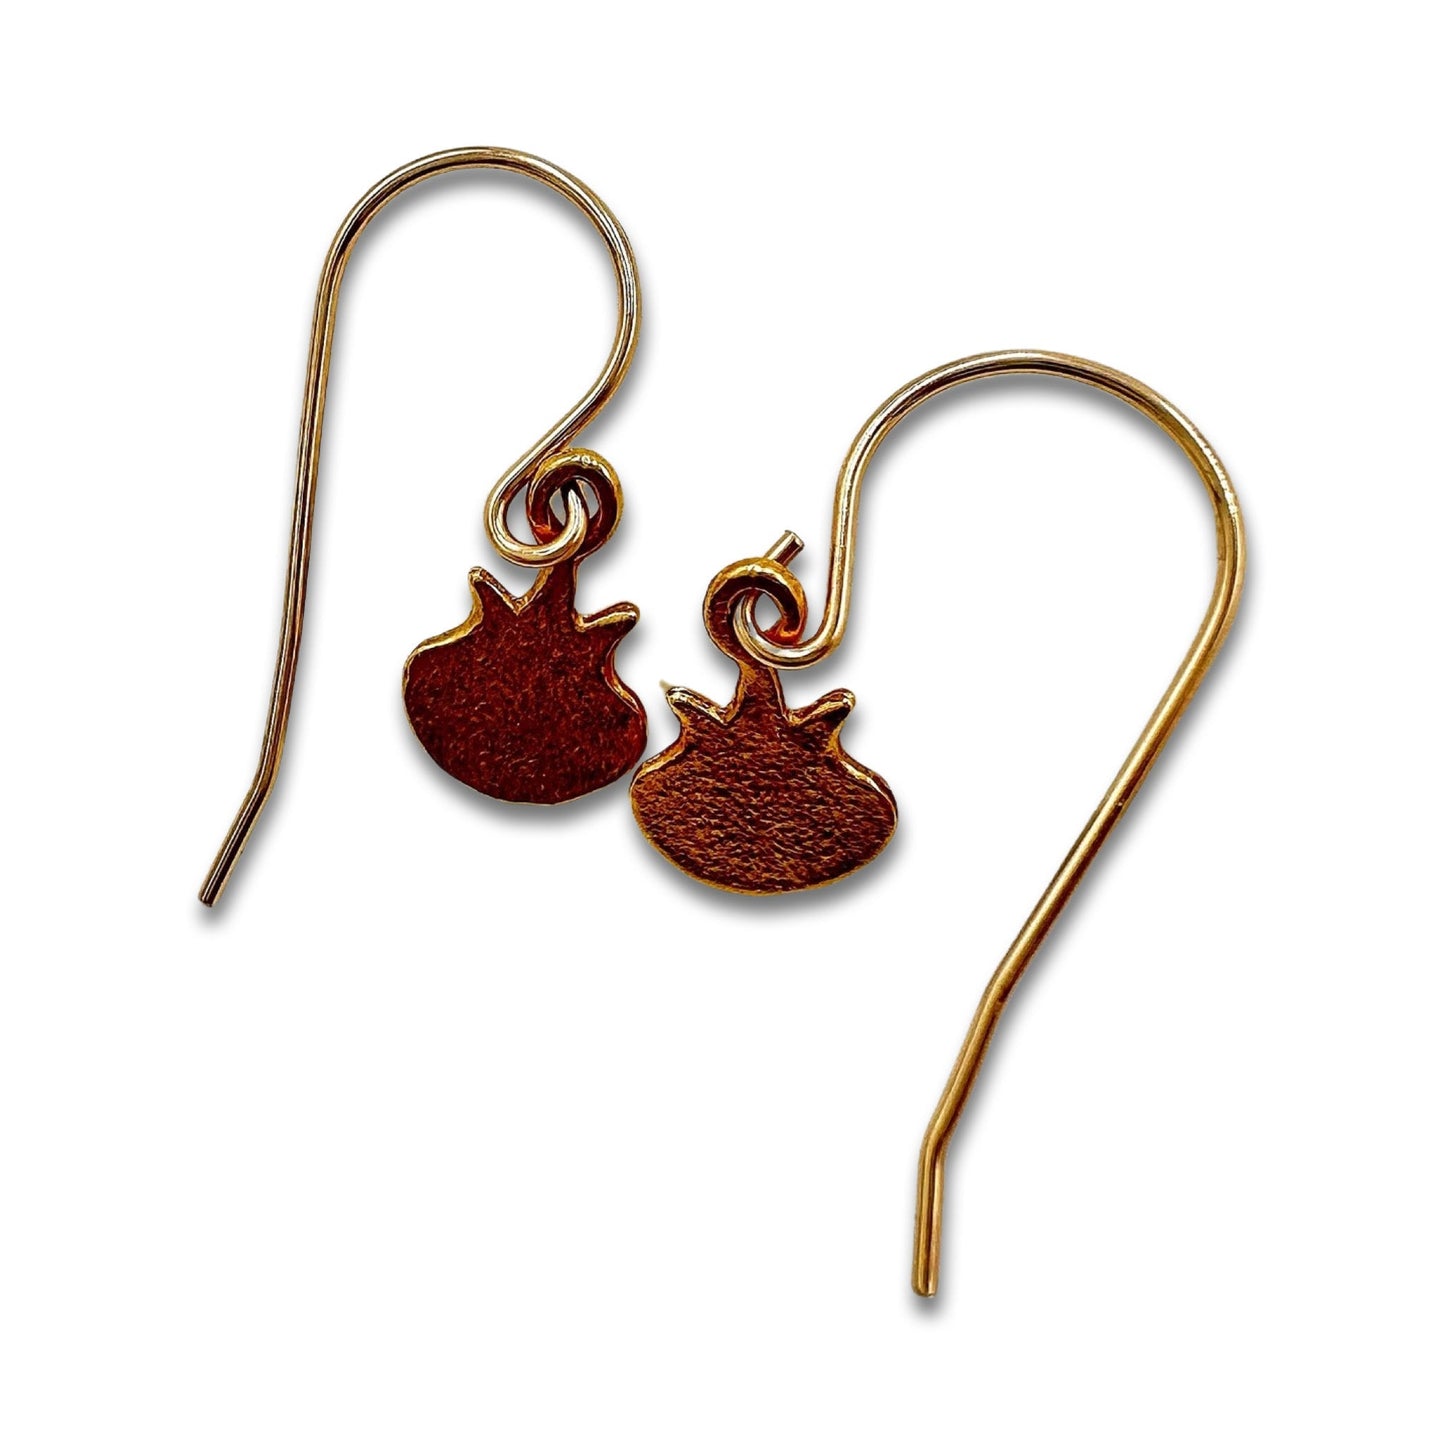 Gold Filled Pomegranate earrings